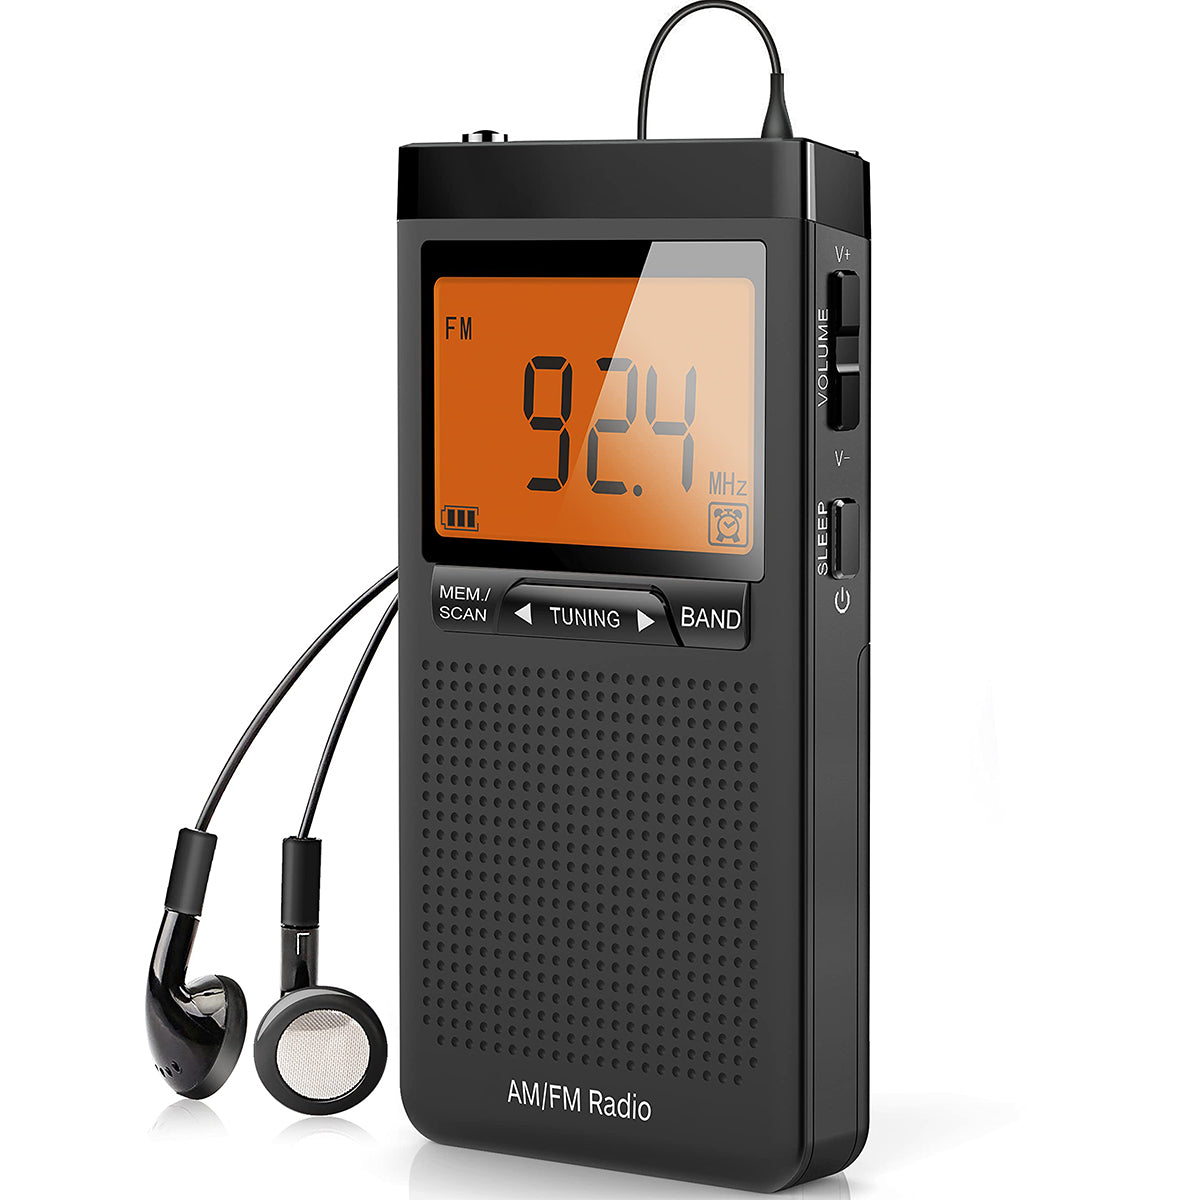 Verilux Portable Radio Personal Radio, Pocket Transistor Radio Pocket Walkman Radio Music Player Battery Operated by 2AAA Batteries, Rechargeable Mini AM FM Radio with LCD Display for Walking Running